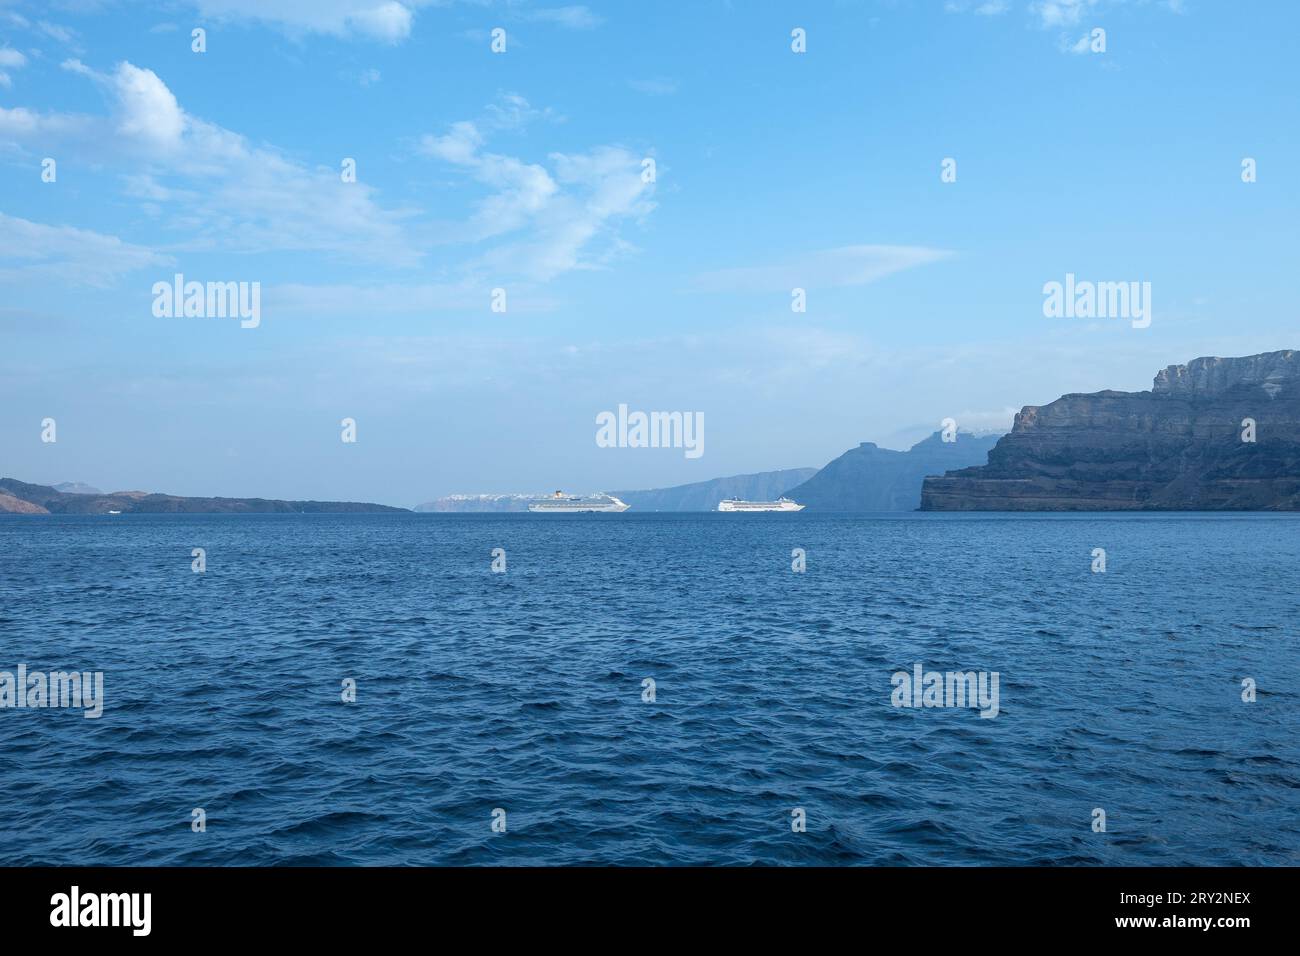 Santorini, Greece - September 7, 2023 : View of three large cruise liners next to the breathtaking volcanic landscape of Santorini Stock Photo